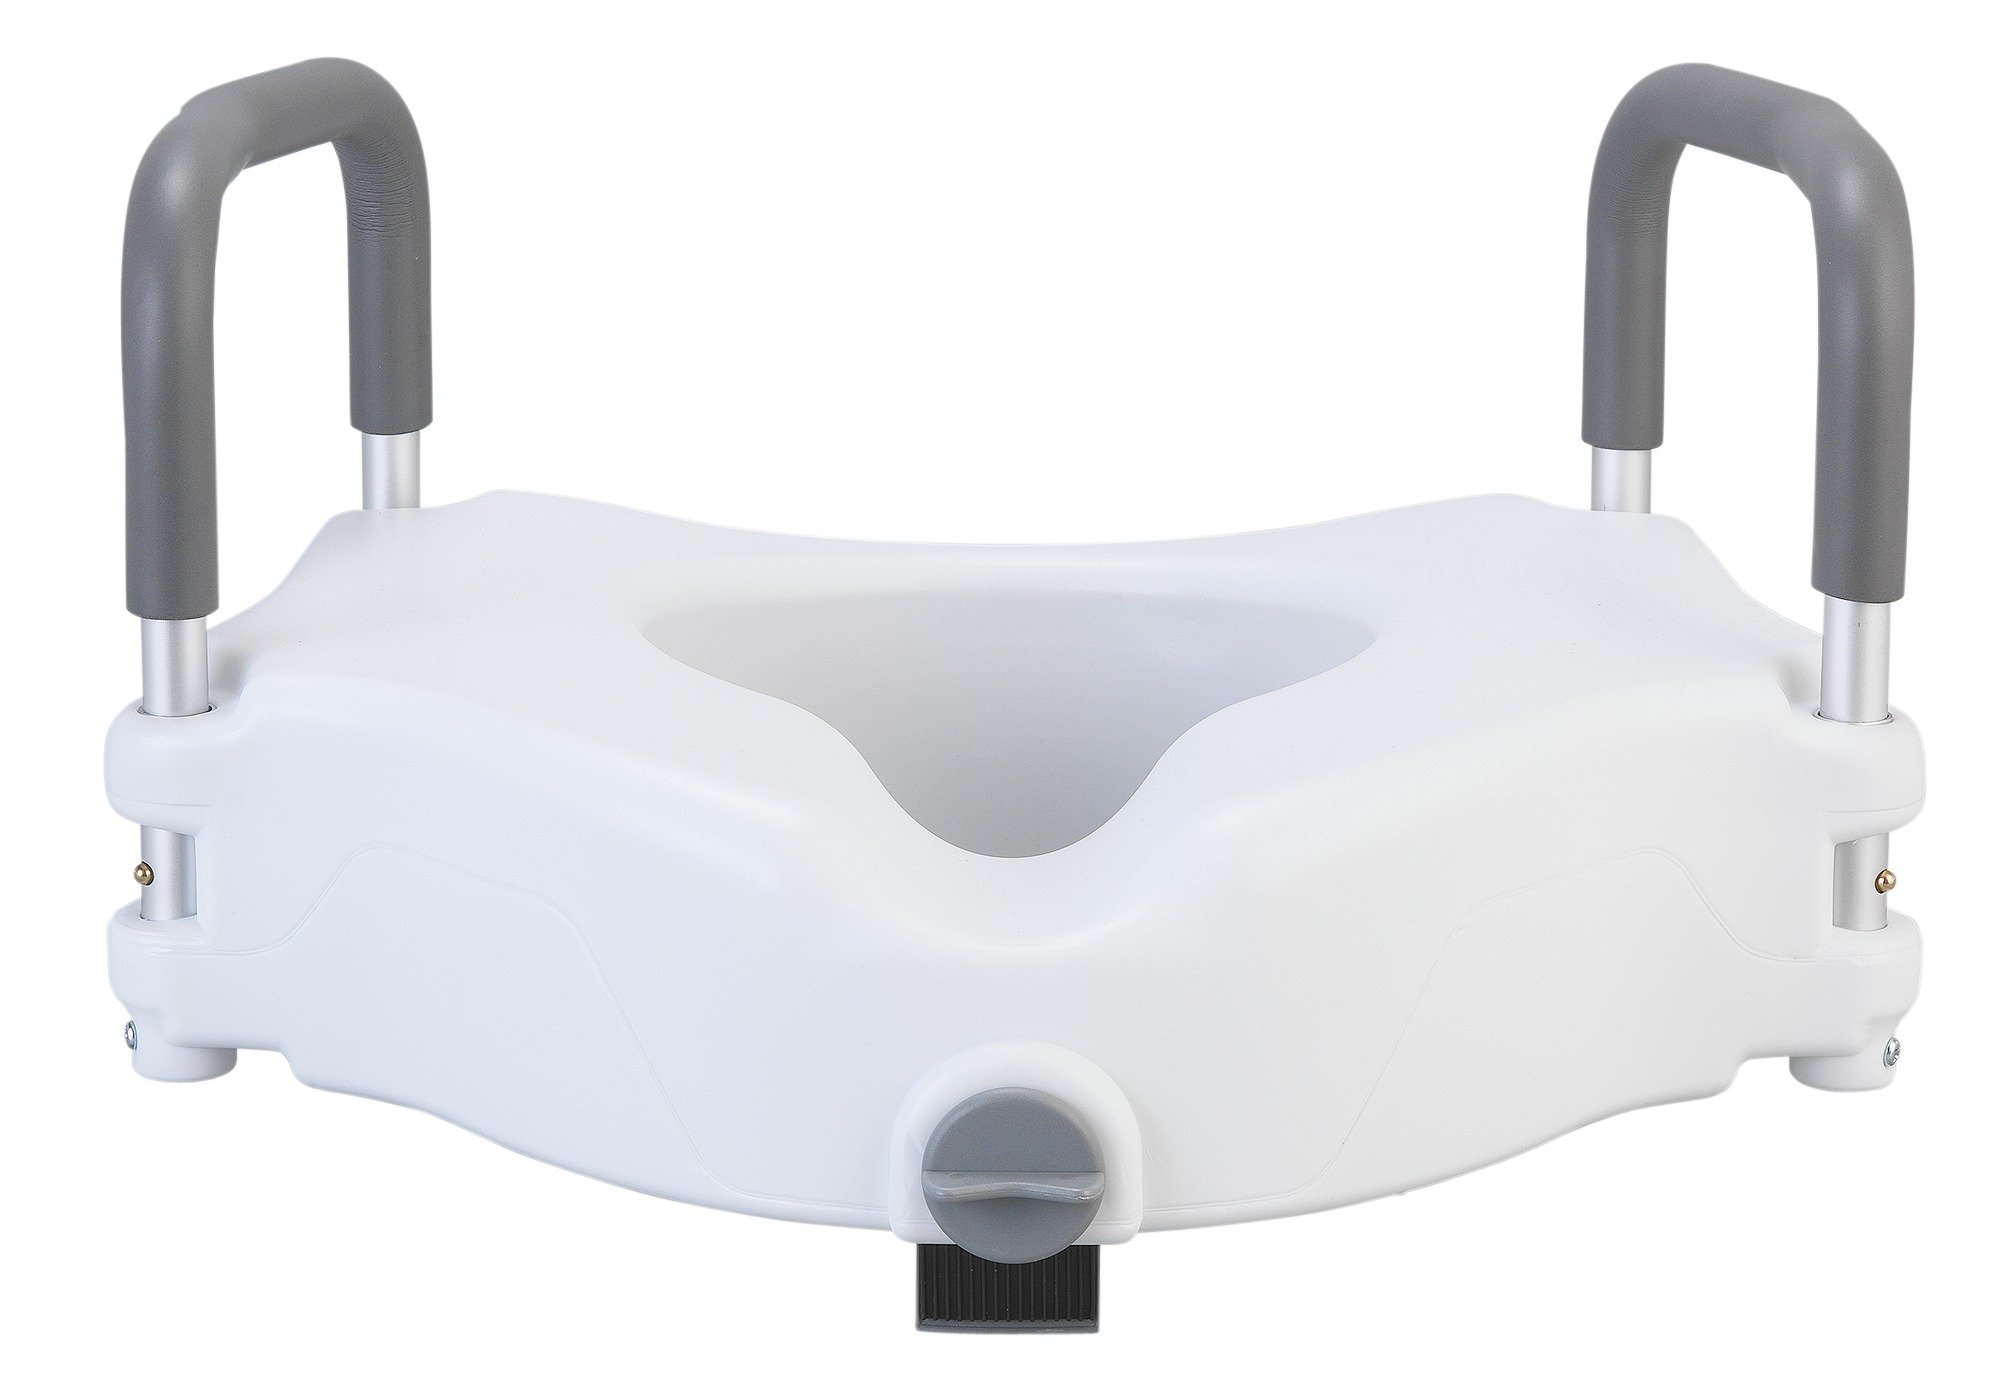 Drive Medical Raised Toilet Seat with Arms